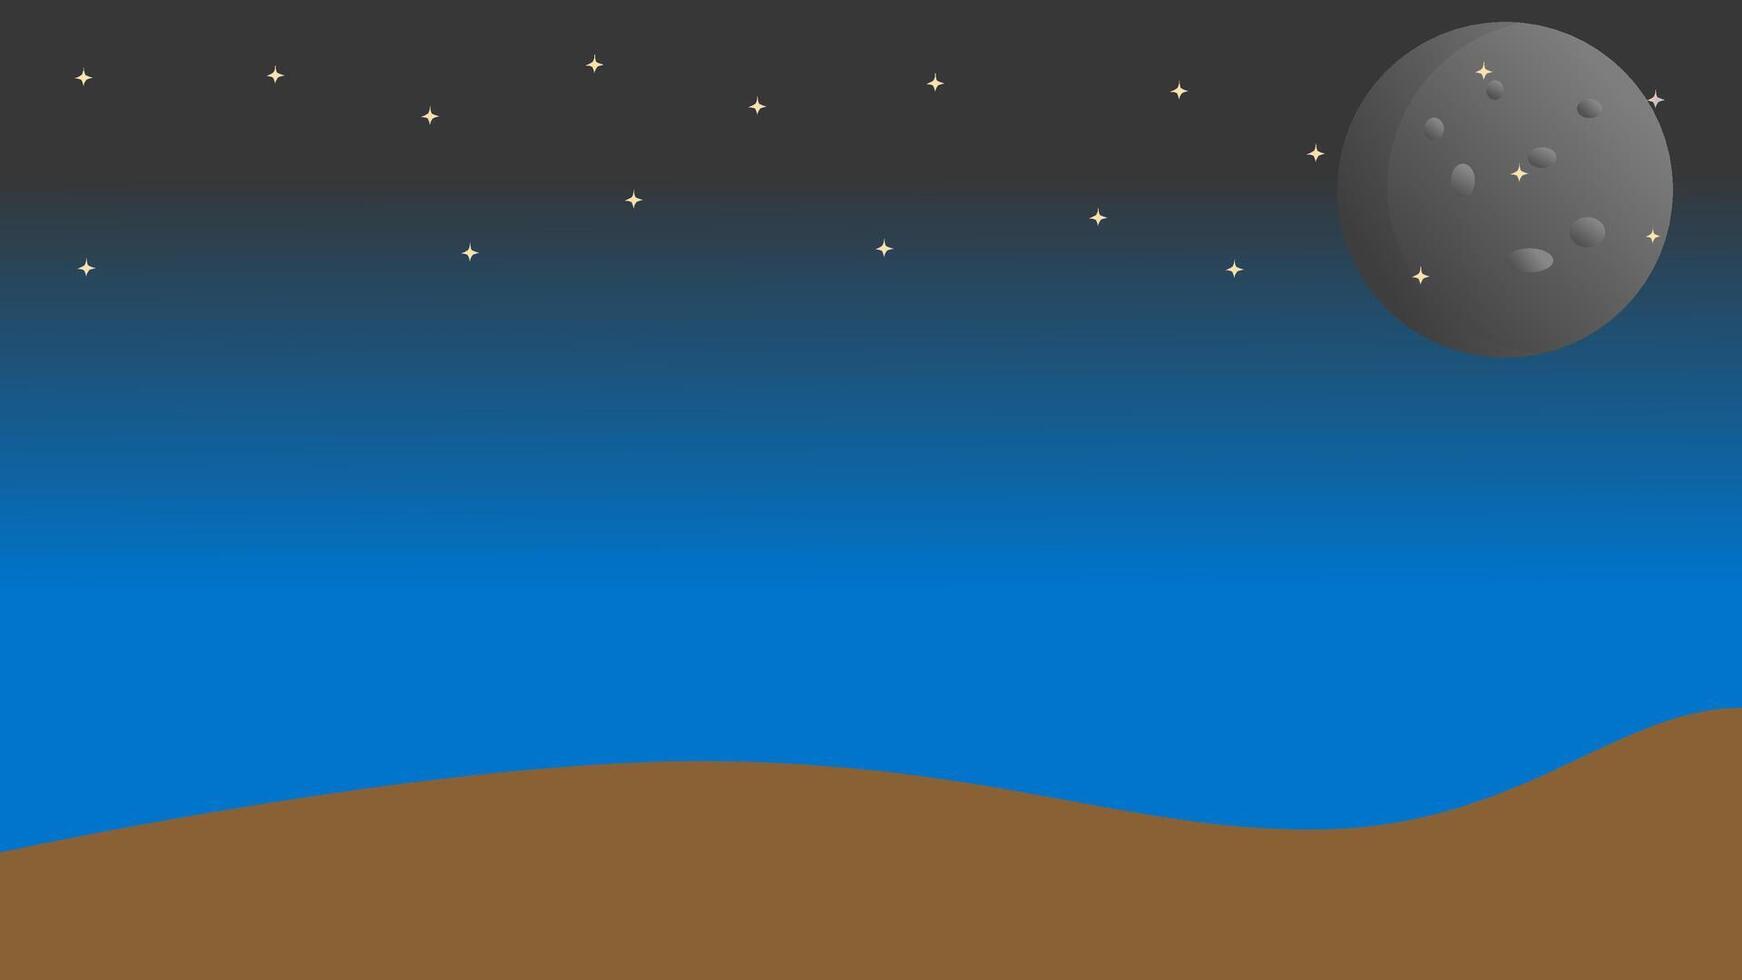 night background with moon and stars in the sky and the desert below vector